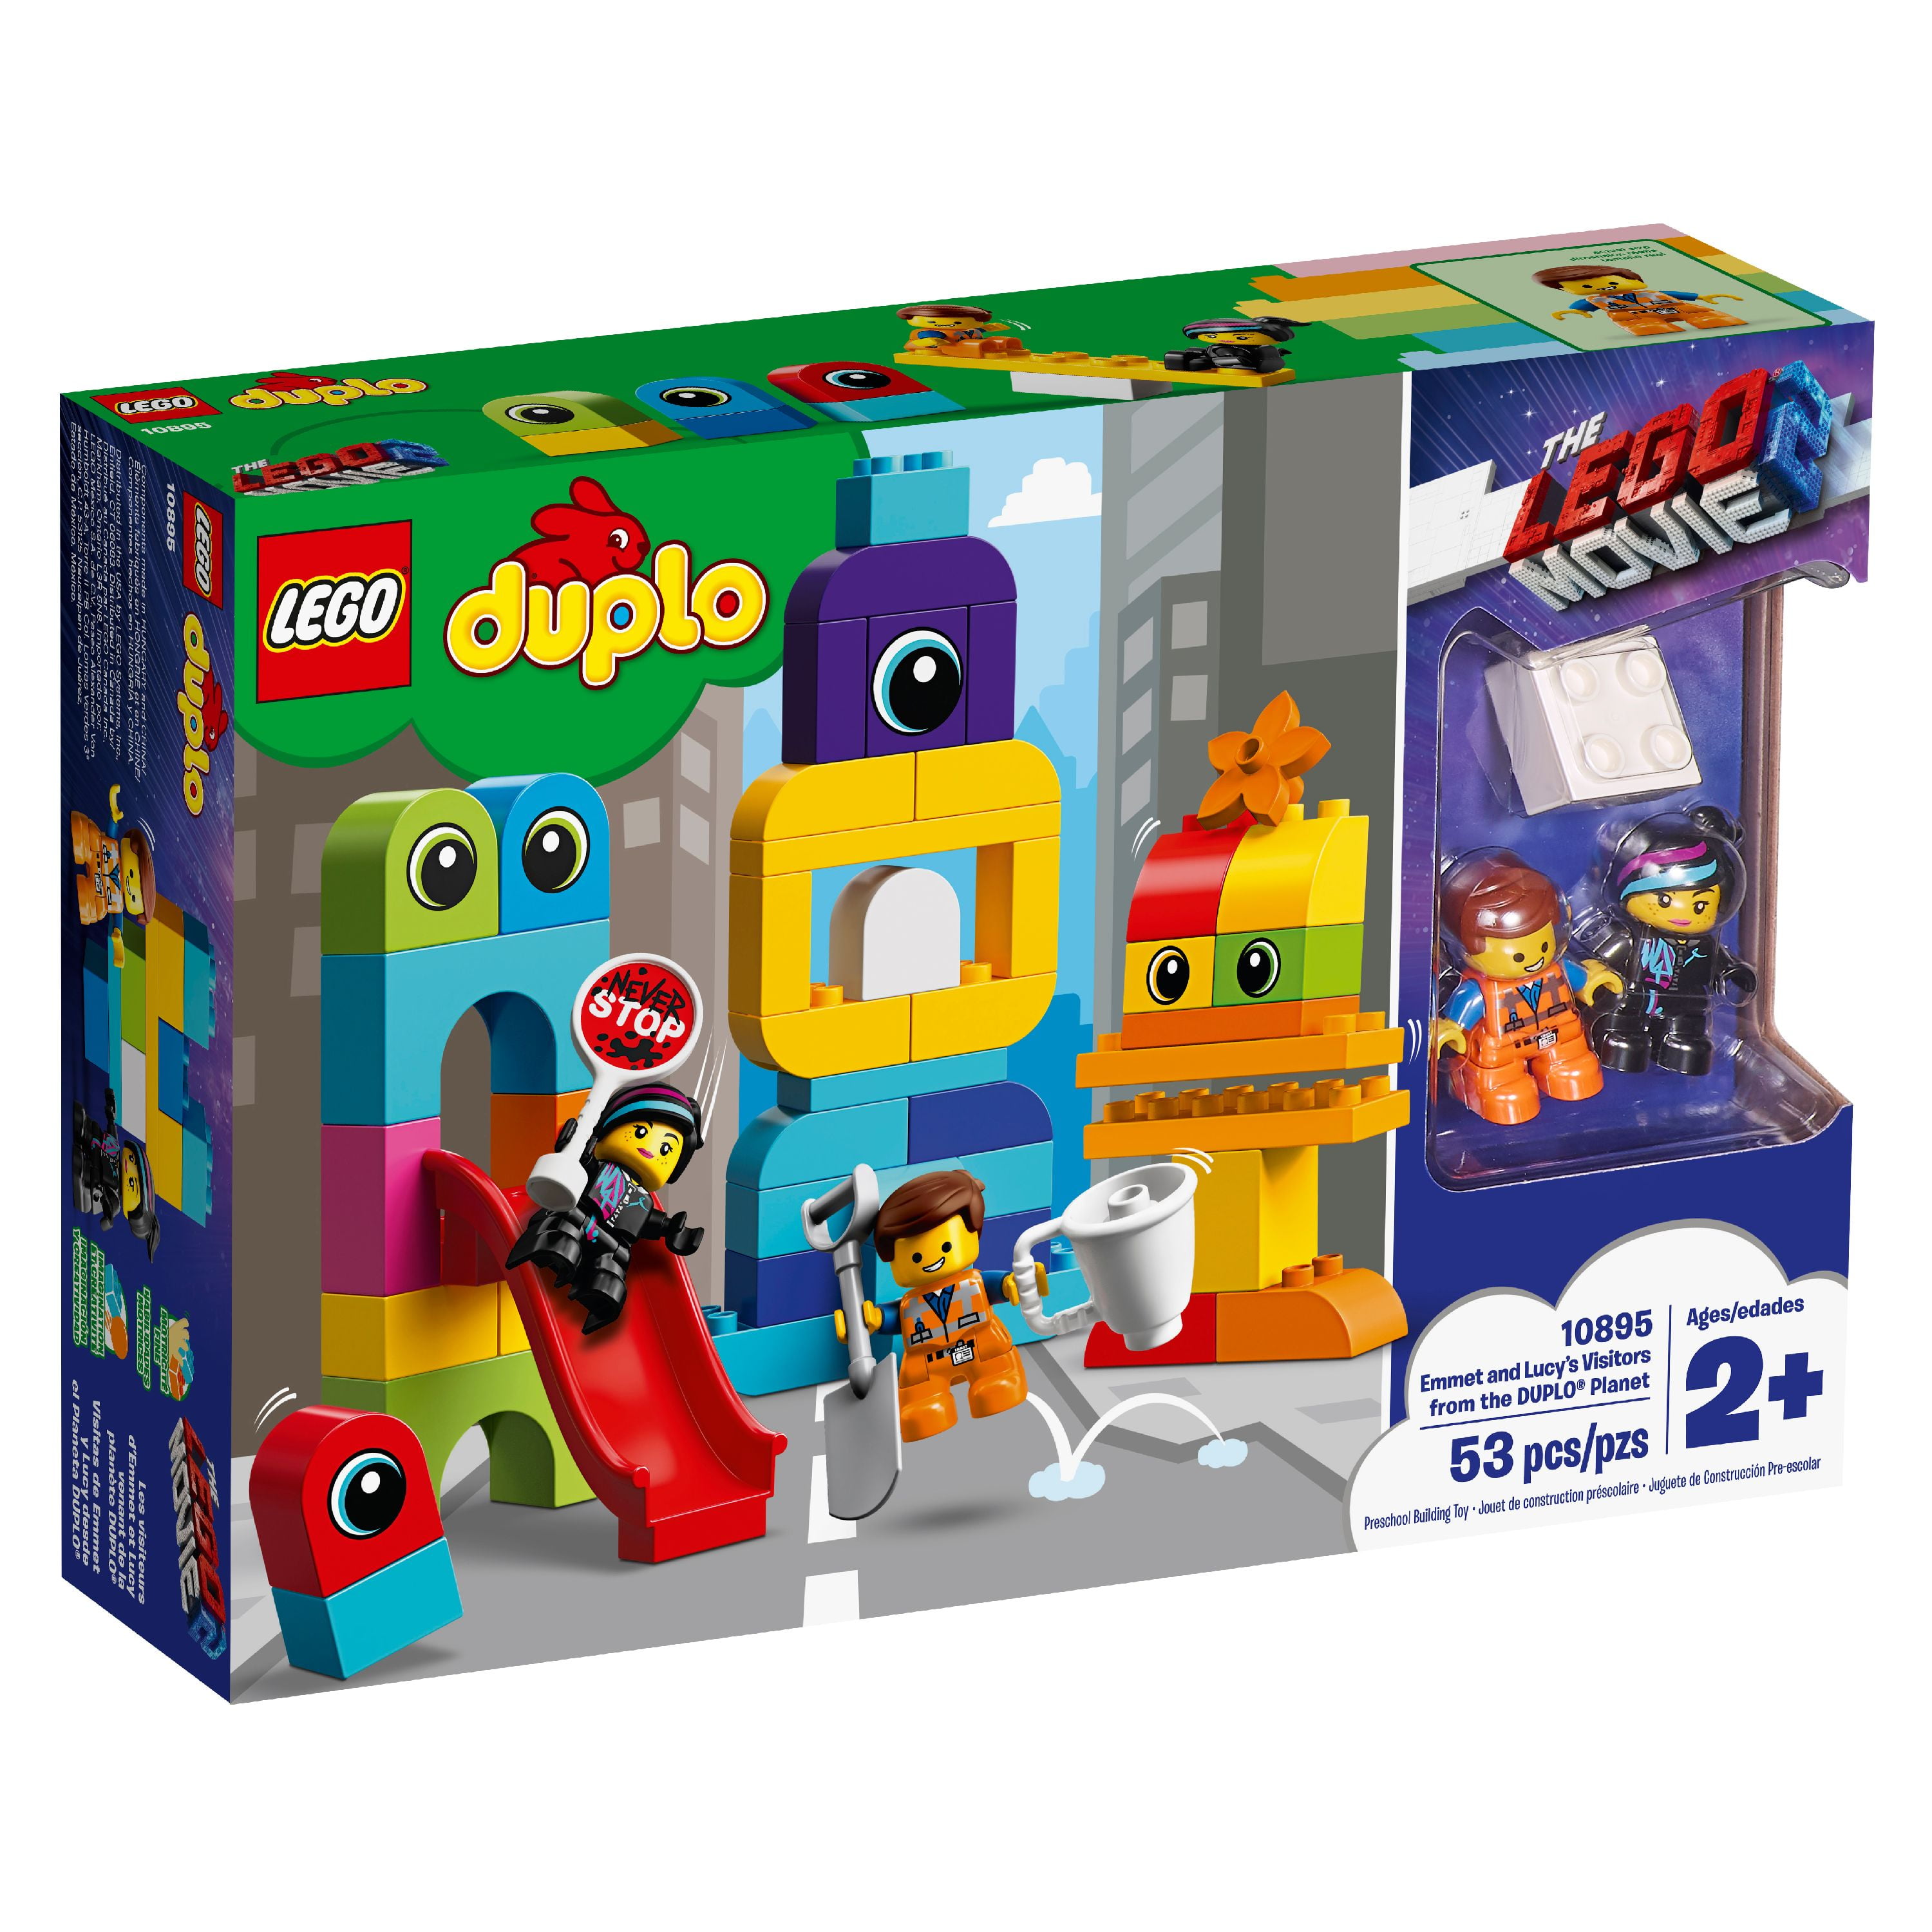 DUPLO Movie 2 Emmet and Lucy's Visitors from 10895 - Walmart.com